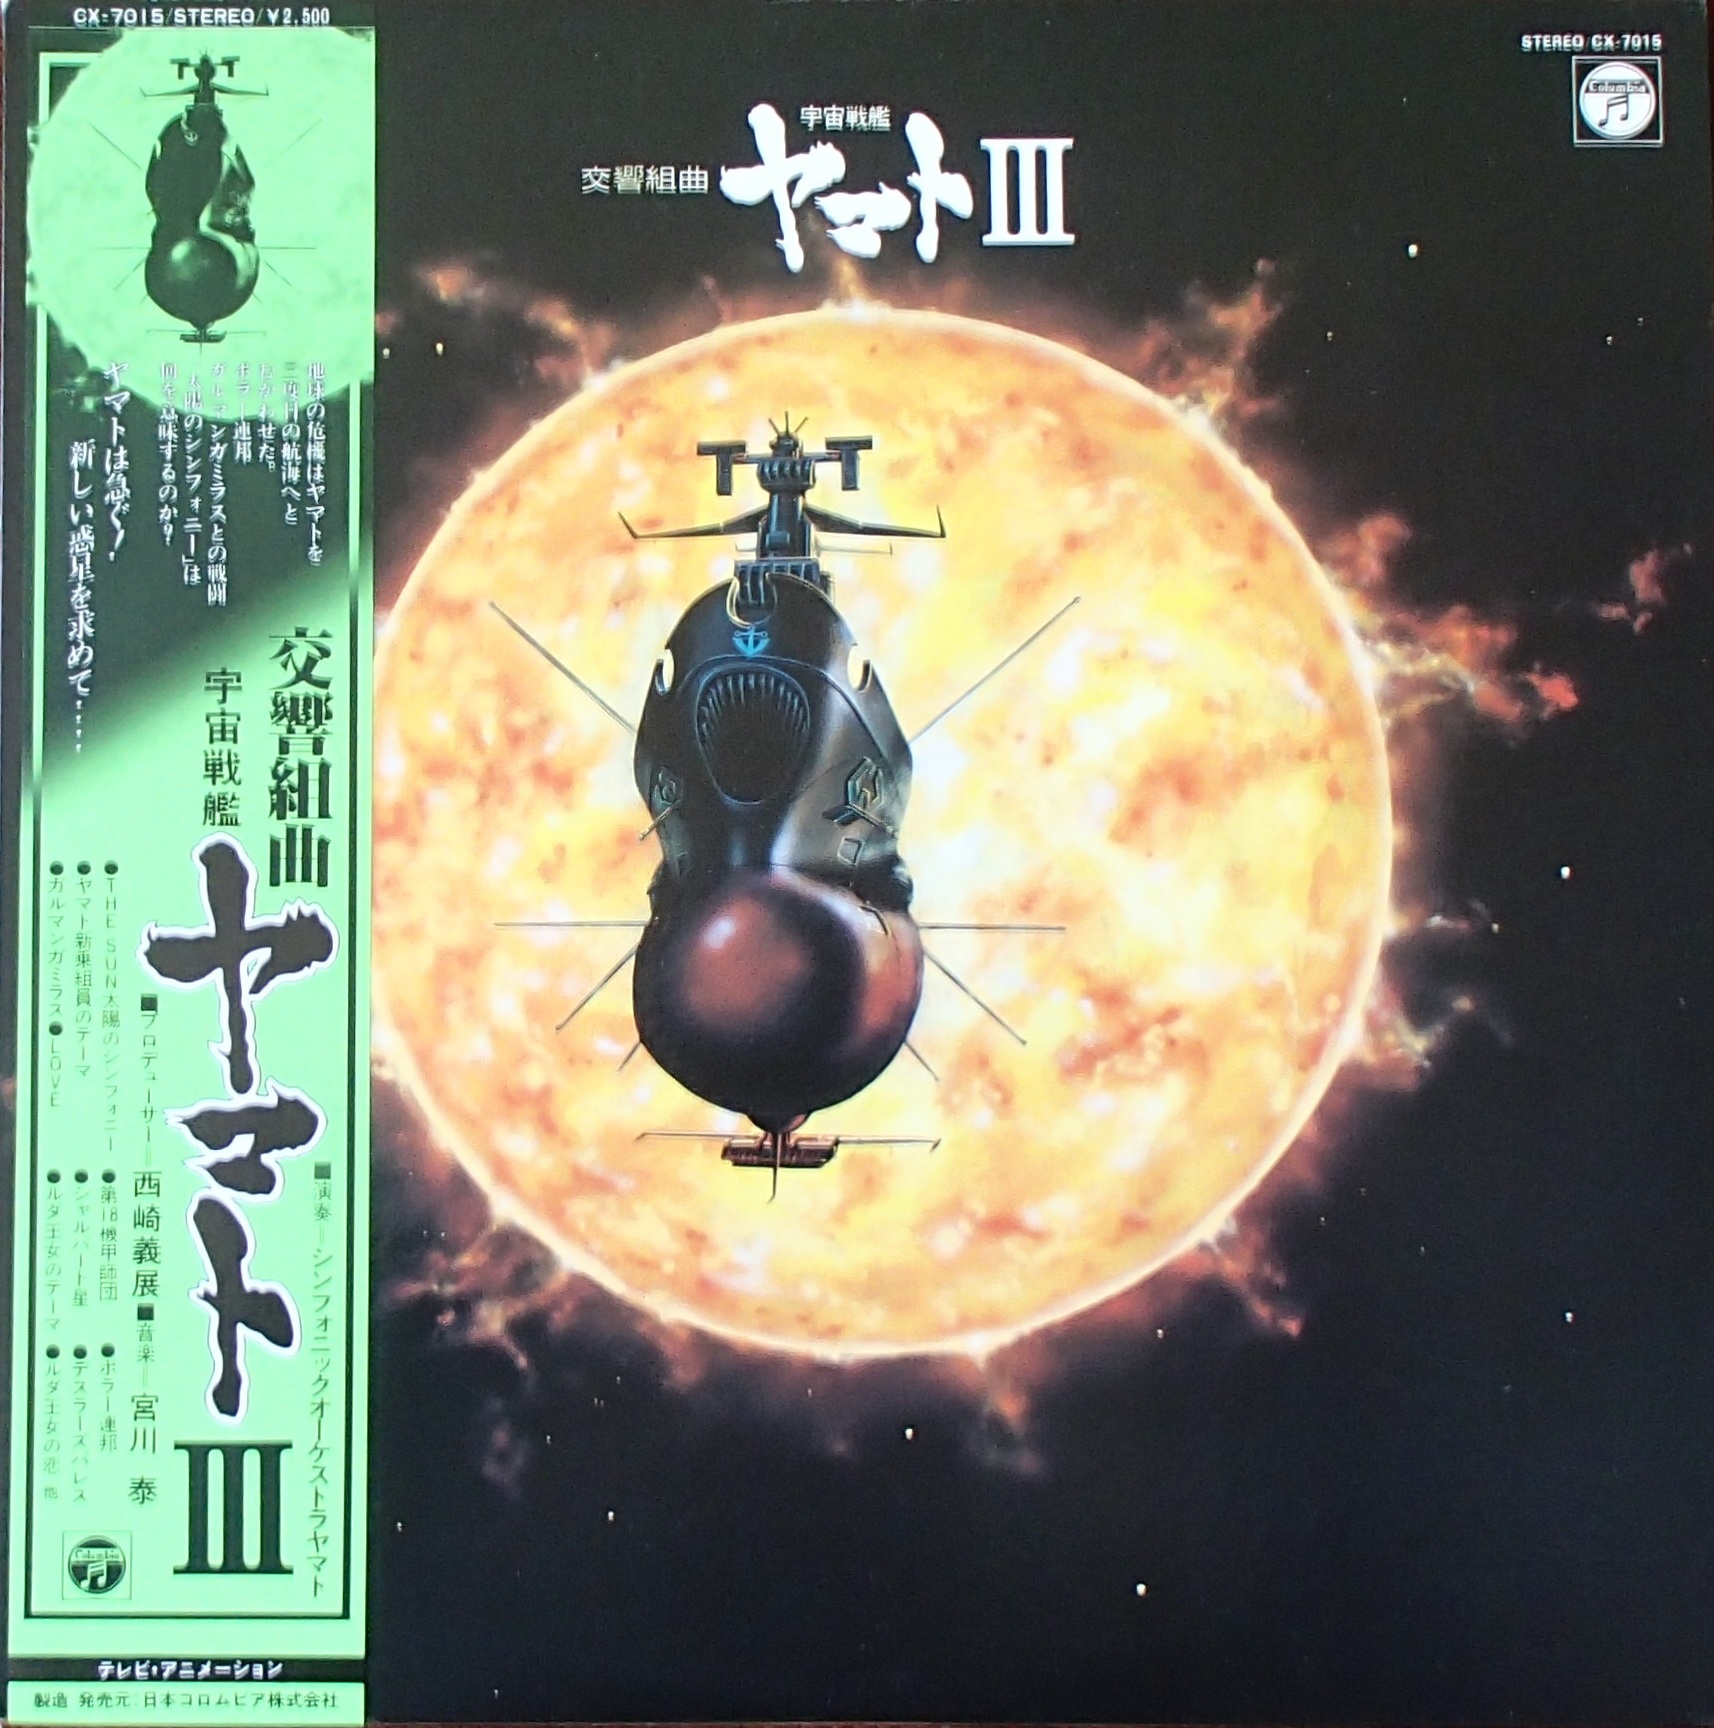 Space Battleship Yamato Soundtrack to the anime television series